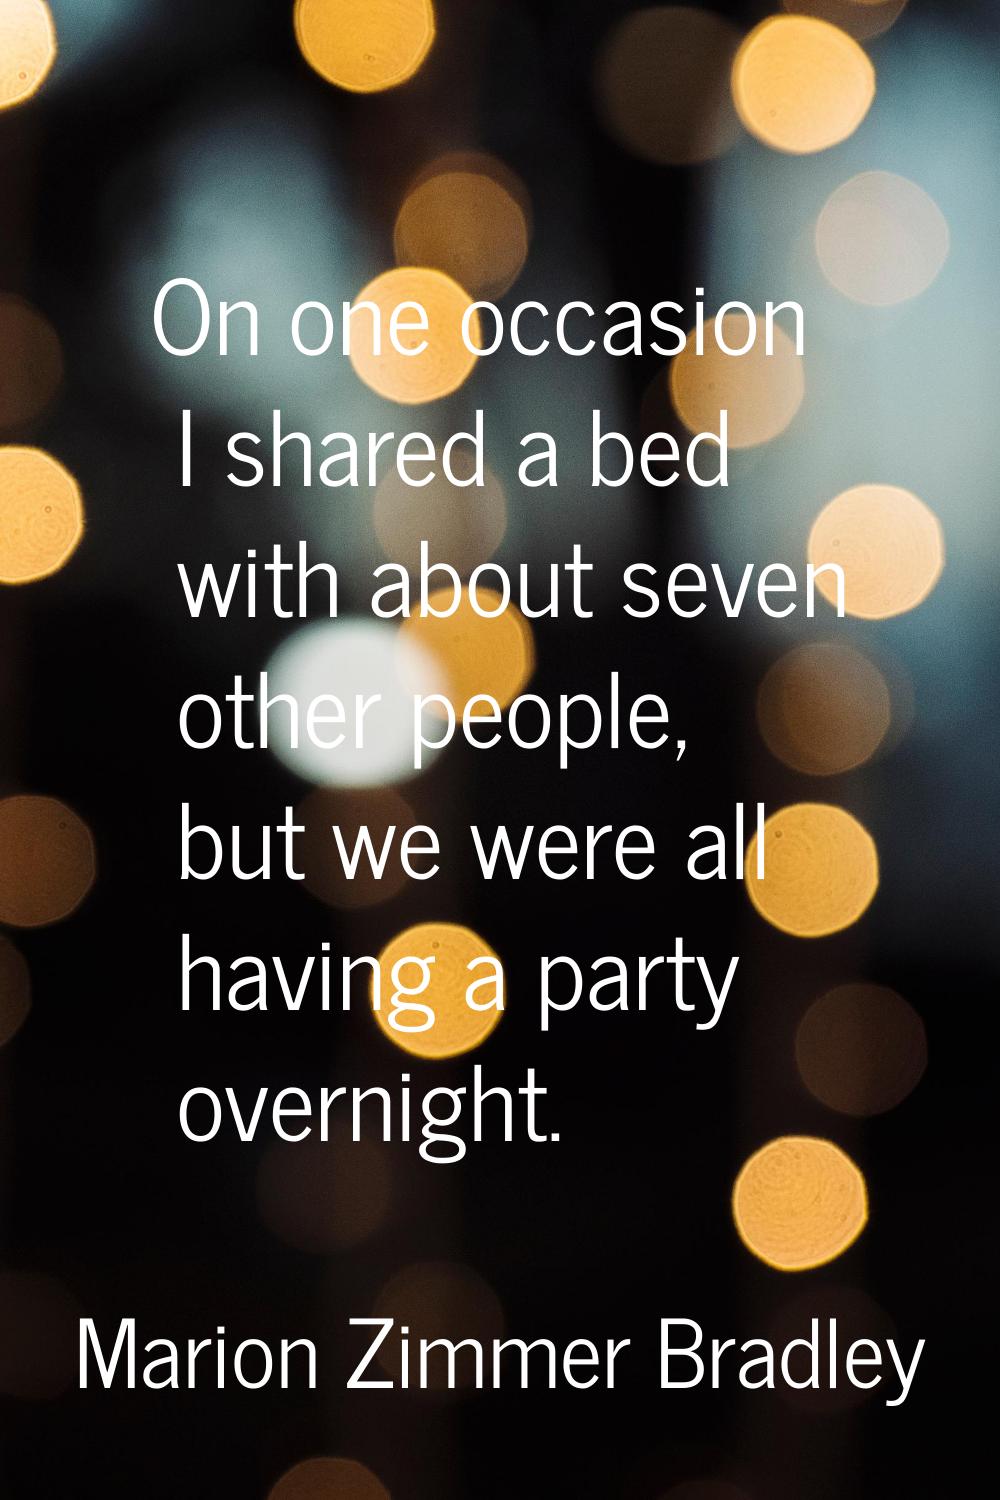 On one occasion I shared a bed with about seven other people, but we were all having a party overni